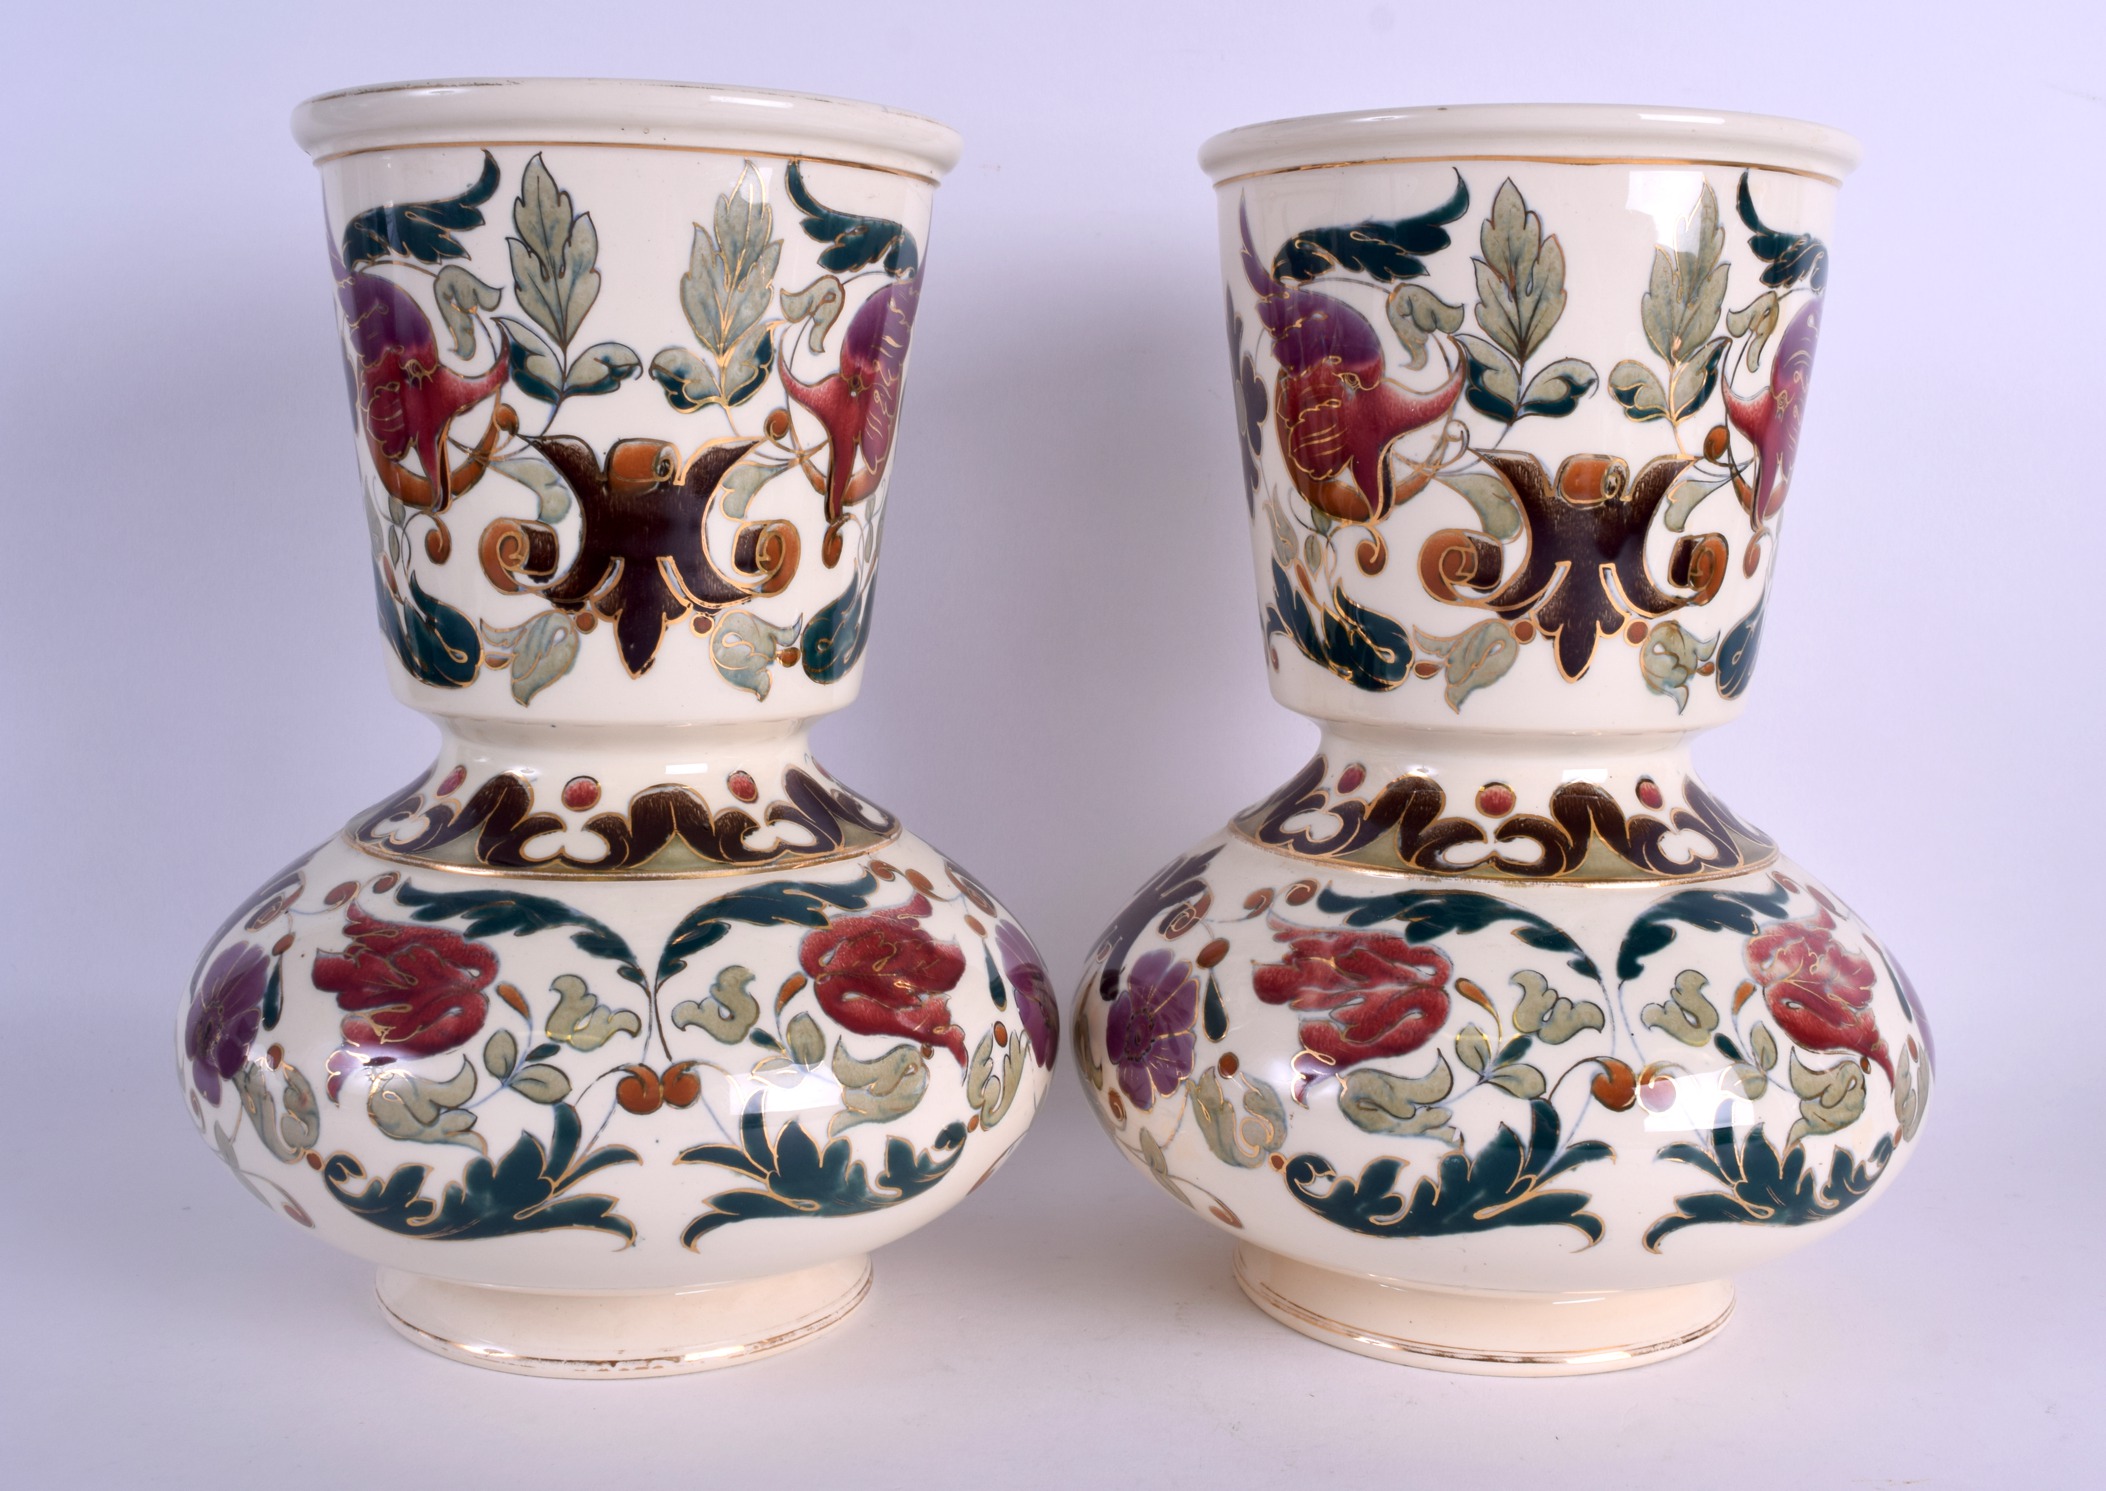 A PAIR OF AUSTRO HUNGARIAN RUDOLF DITMAR VASES Zsolnay style, painted with flowers. 25 cm high. - Image 2 of 4